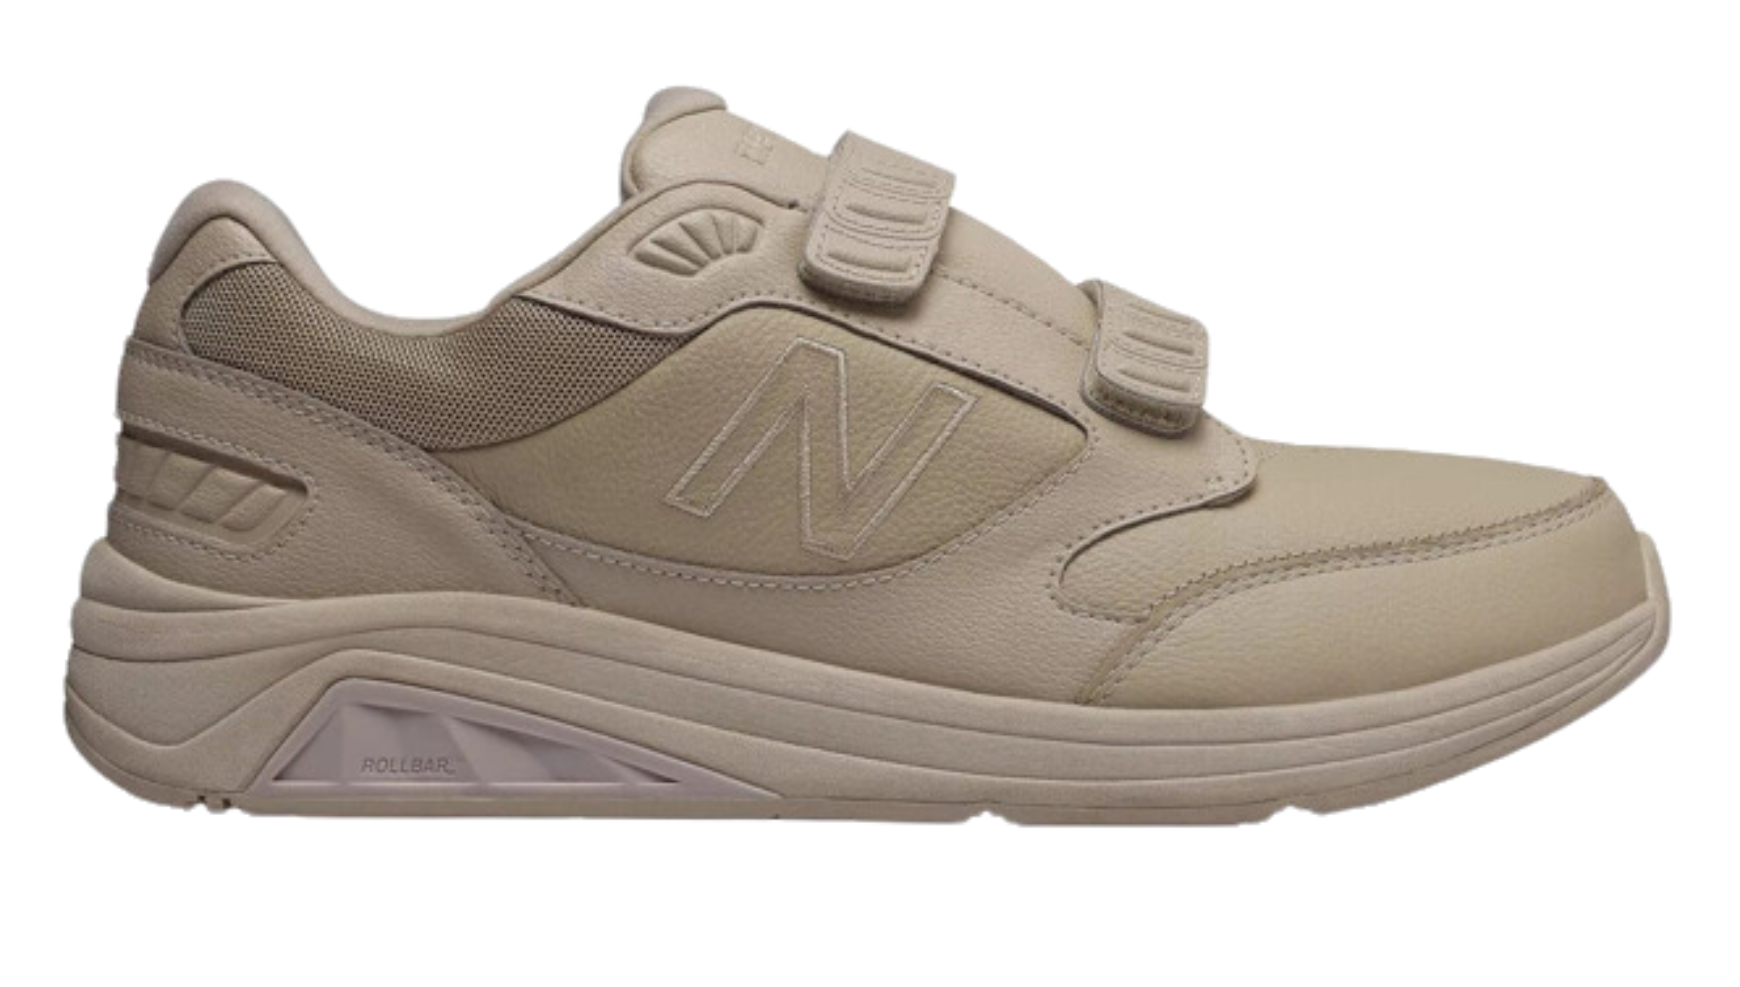 Men's Hook and Loop Leather 928v3 - New Balance at Brandys Shoes